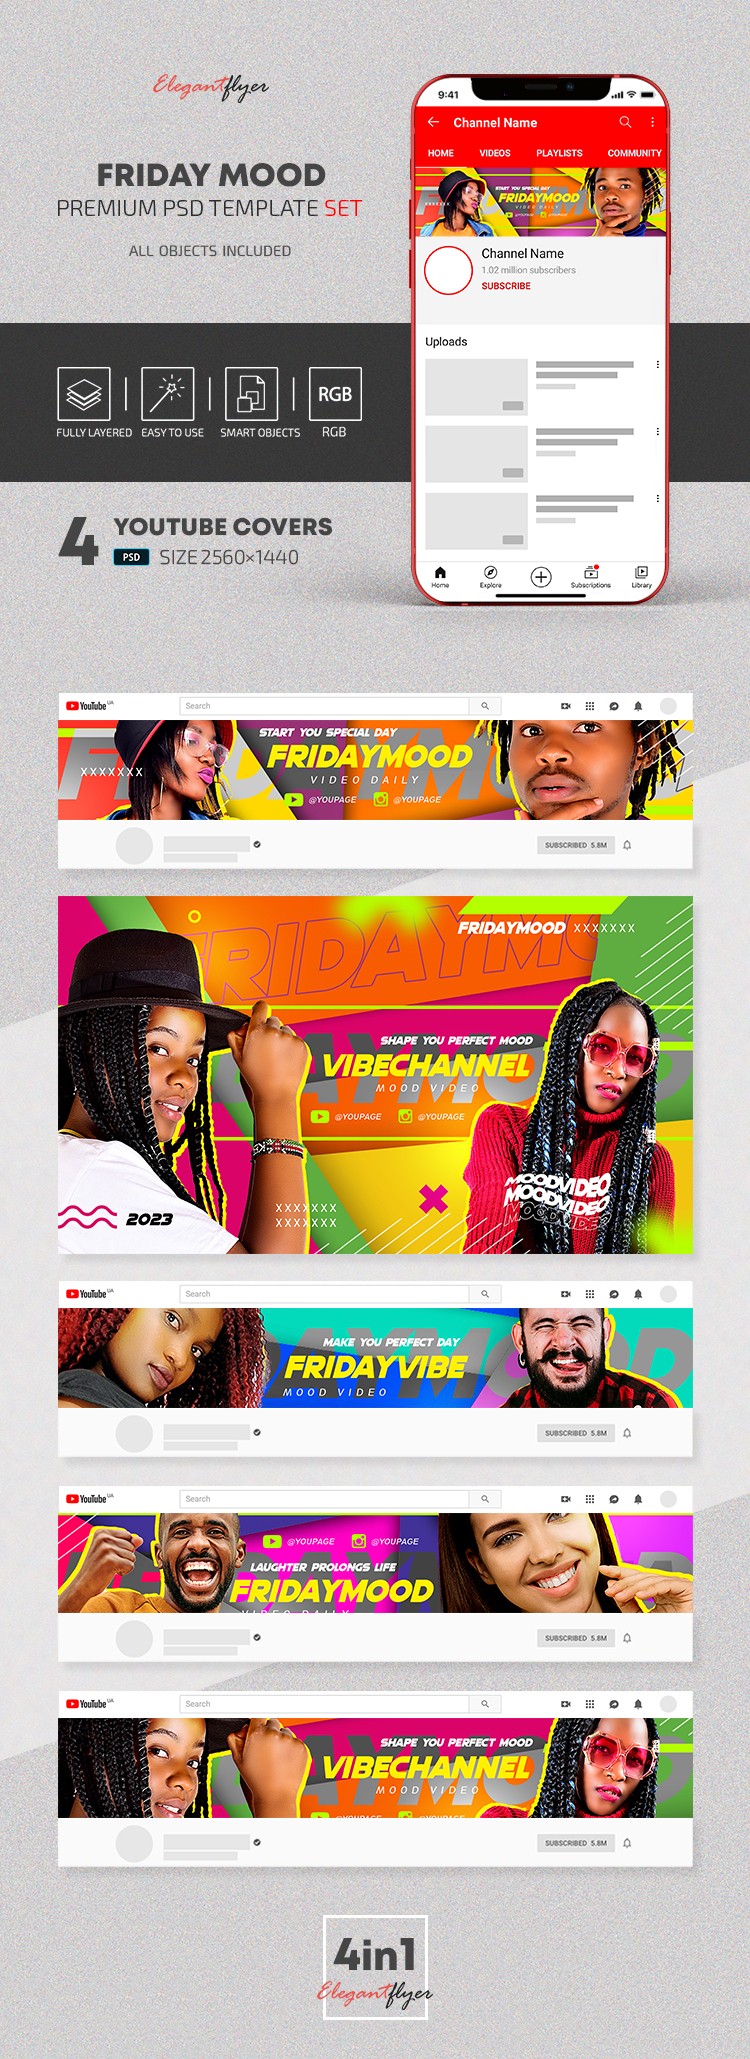 Friday Mood Youtube Channel Banners PSD set by ElegantFlyer